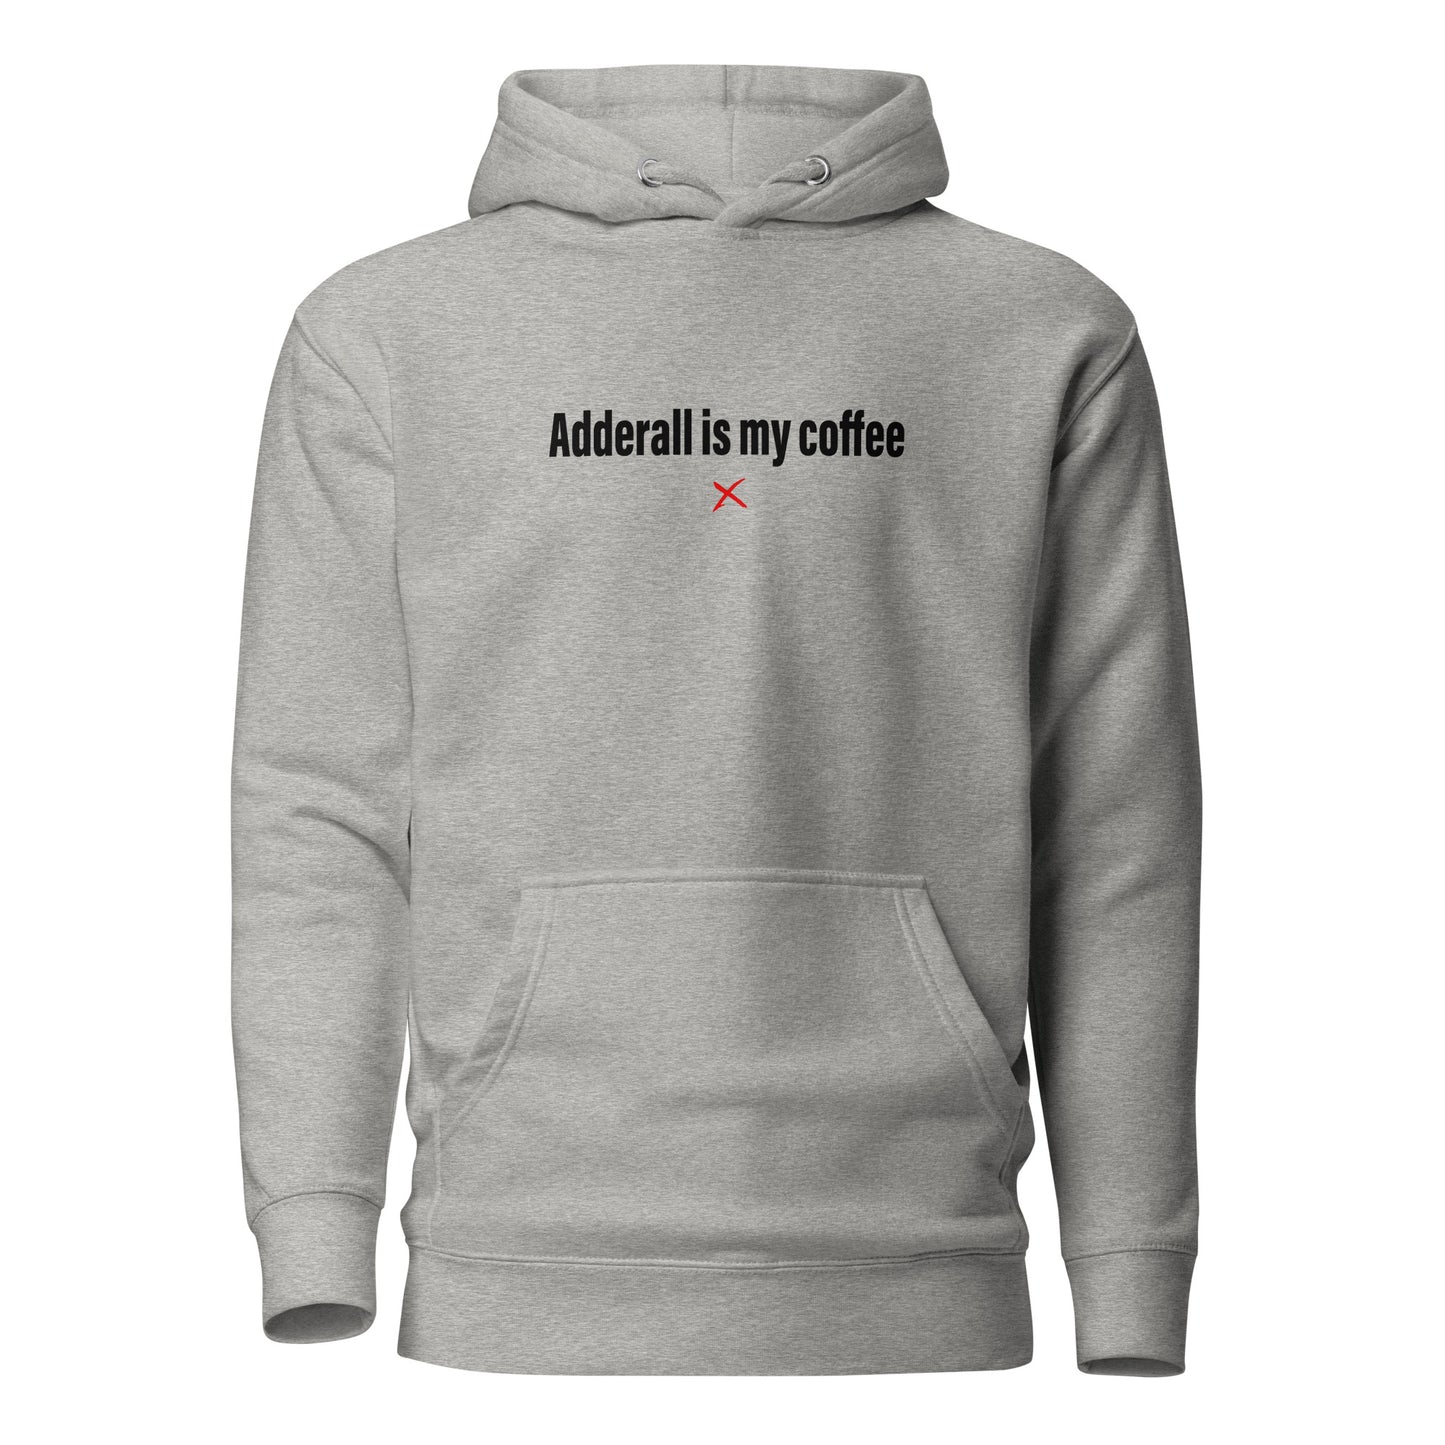 Adderall is my coffee - Hoodie